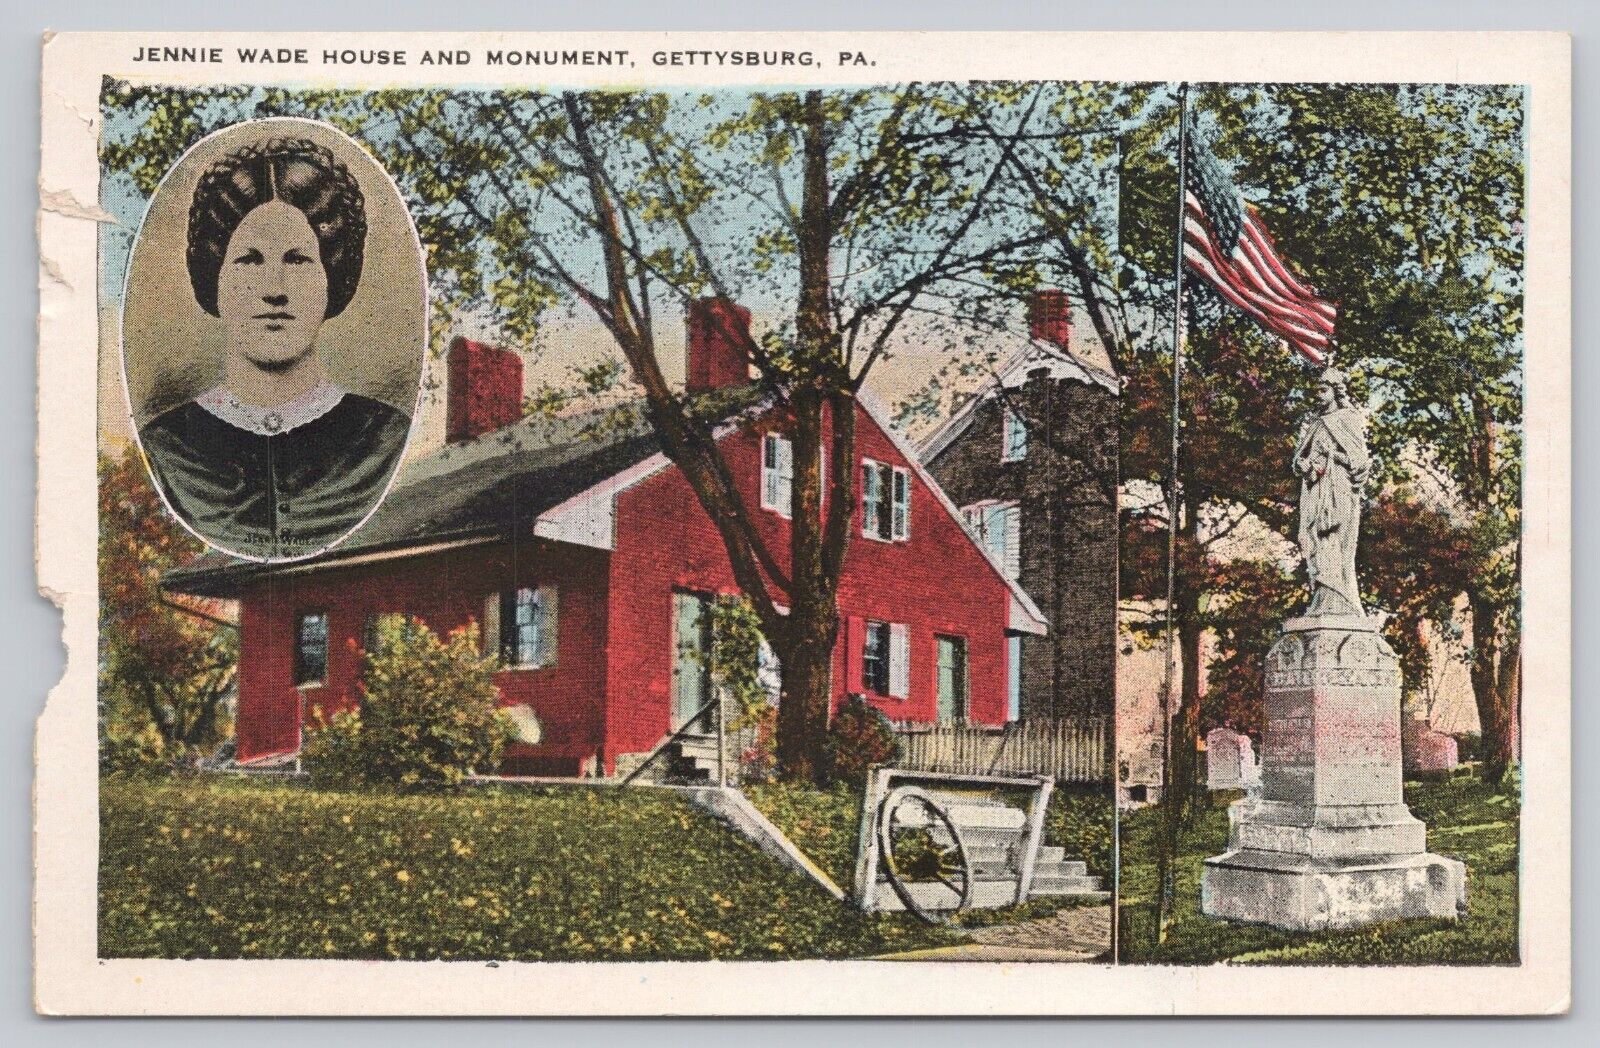 Vtg Post Card Jennie Wade House and Monument, Gettysburg, P.A. B342